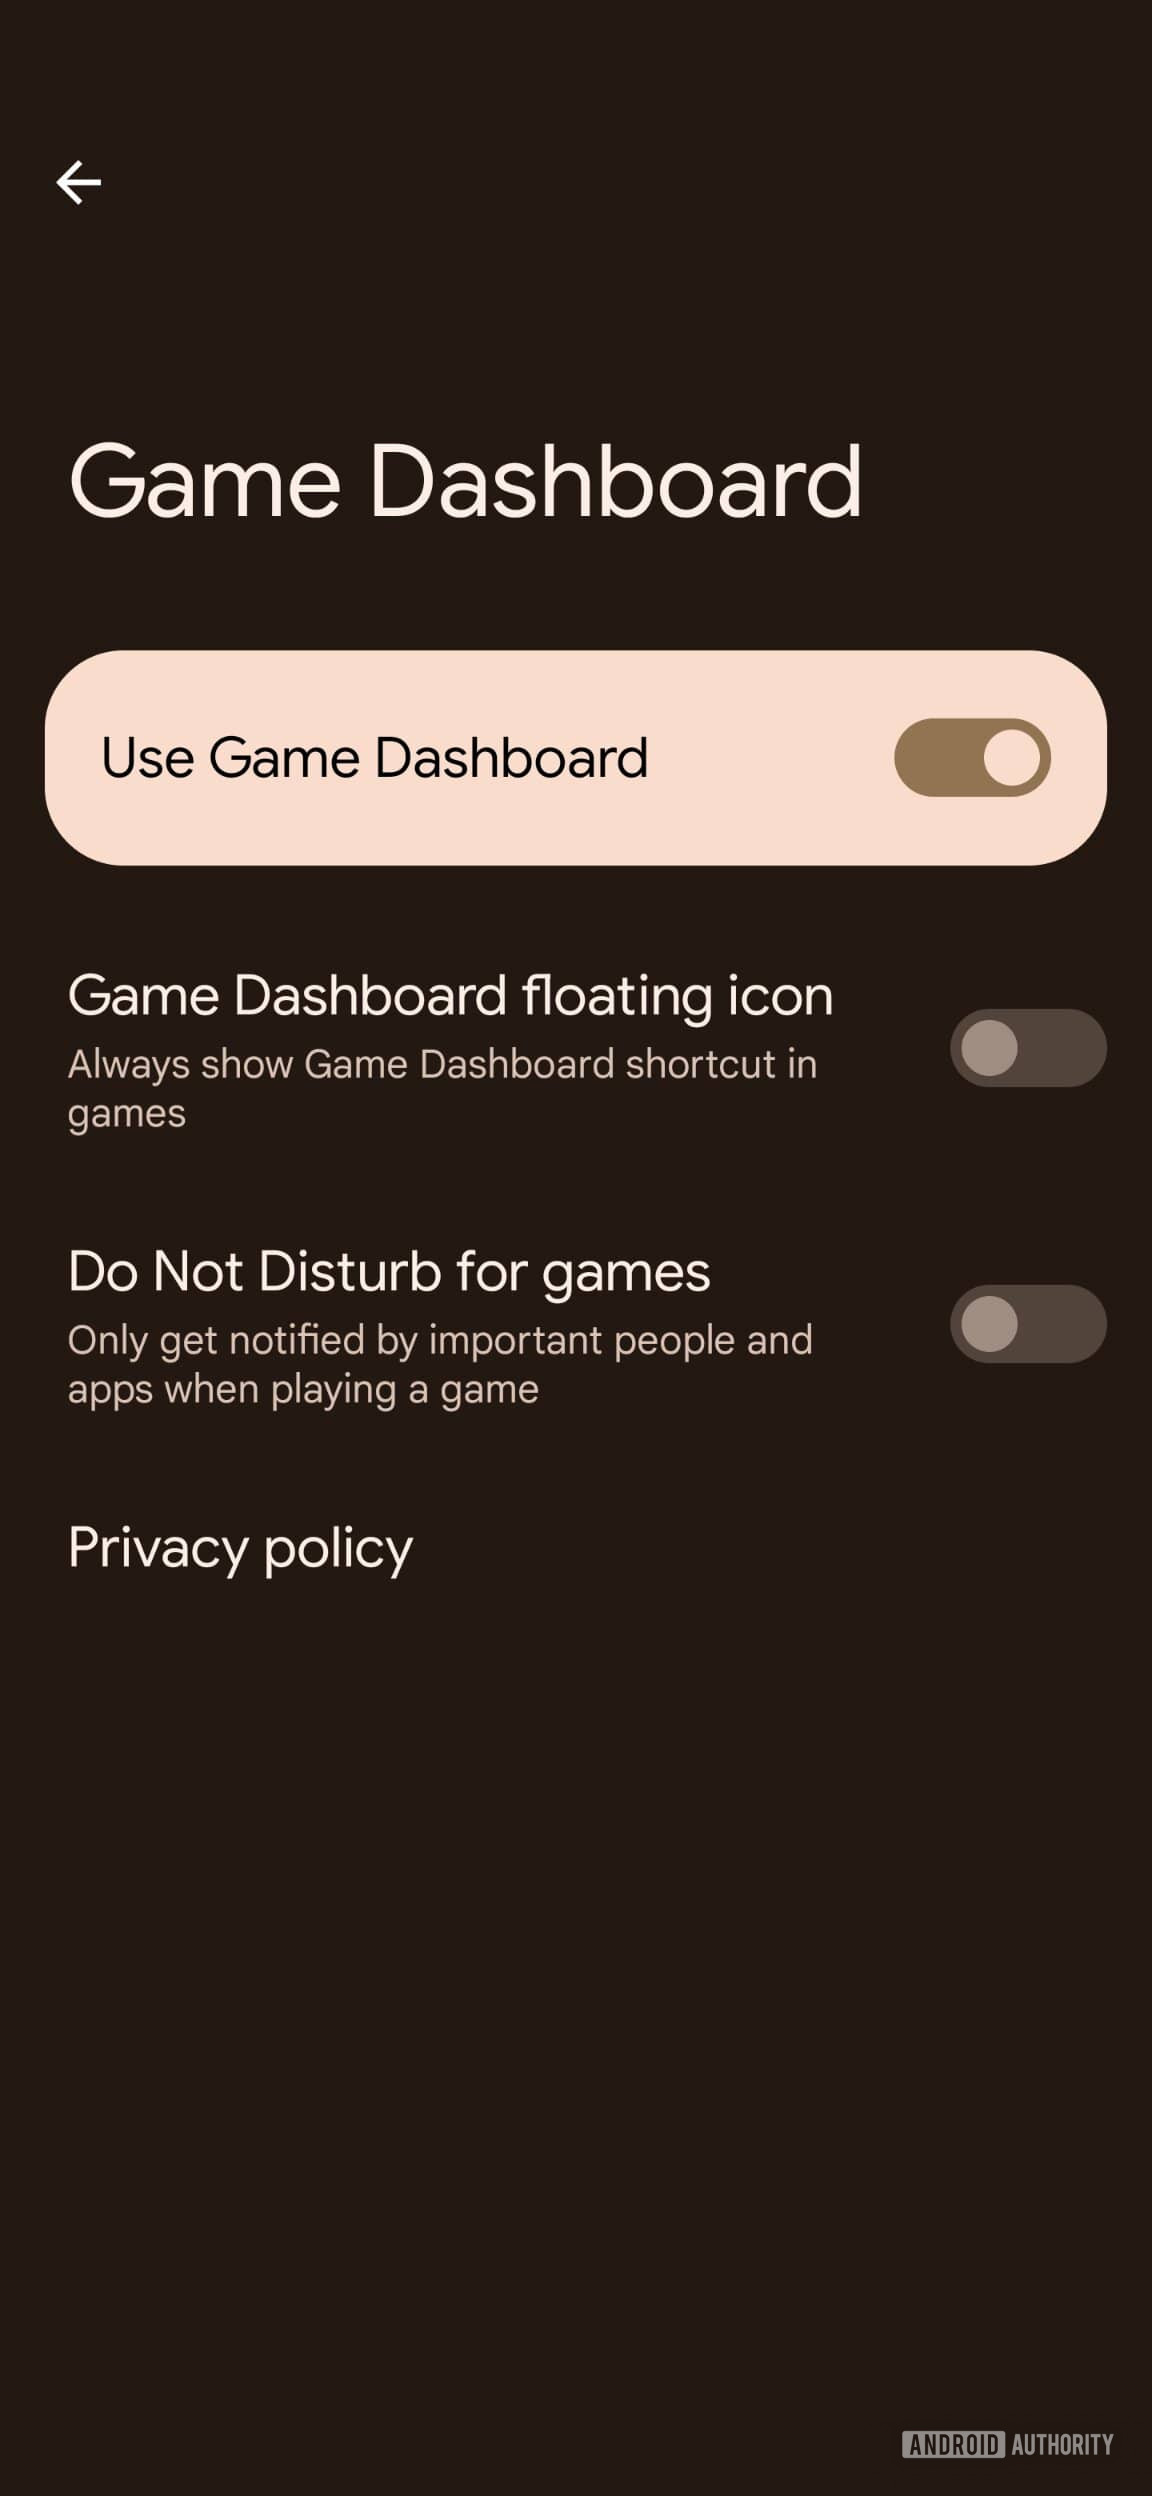 switch to game dashboard